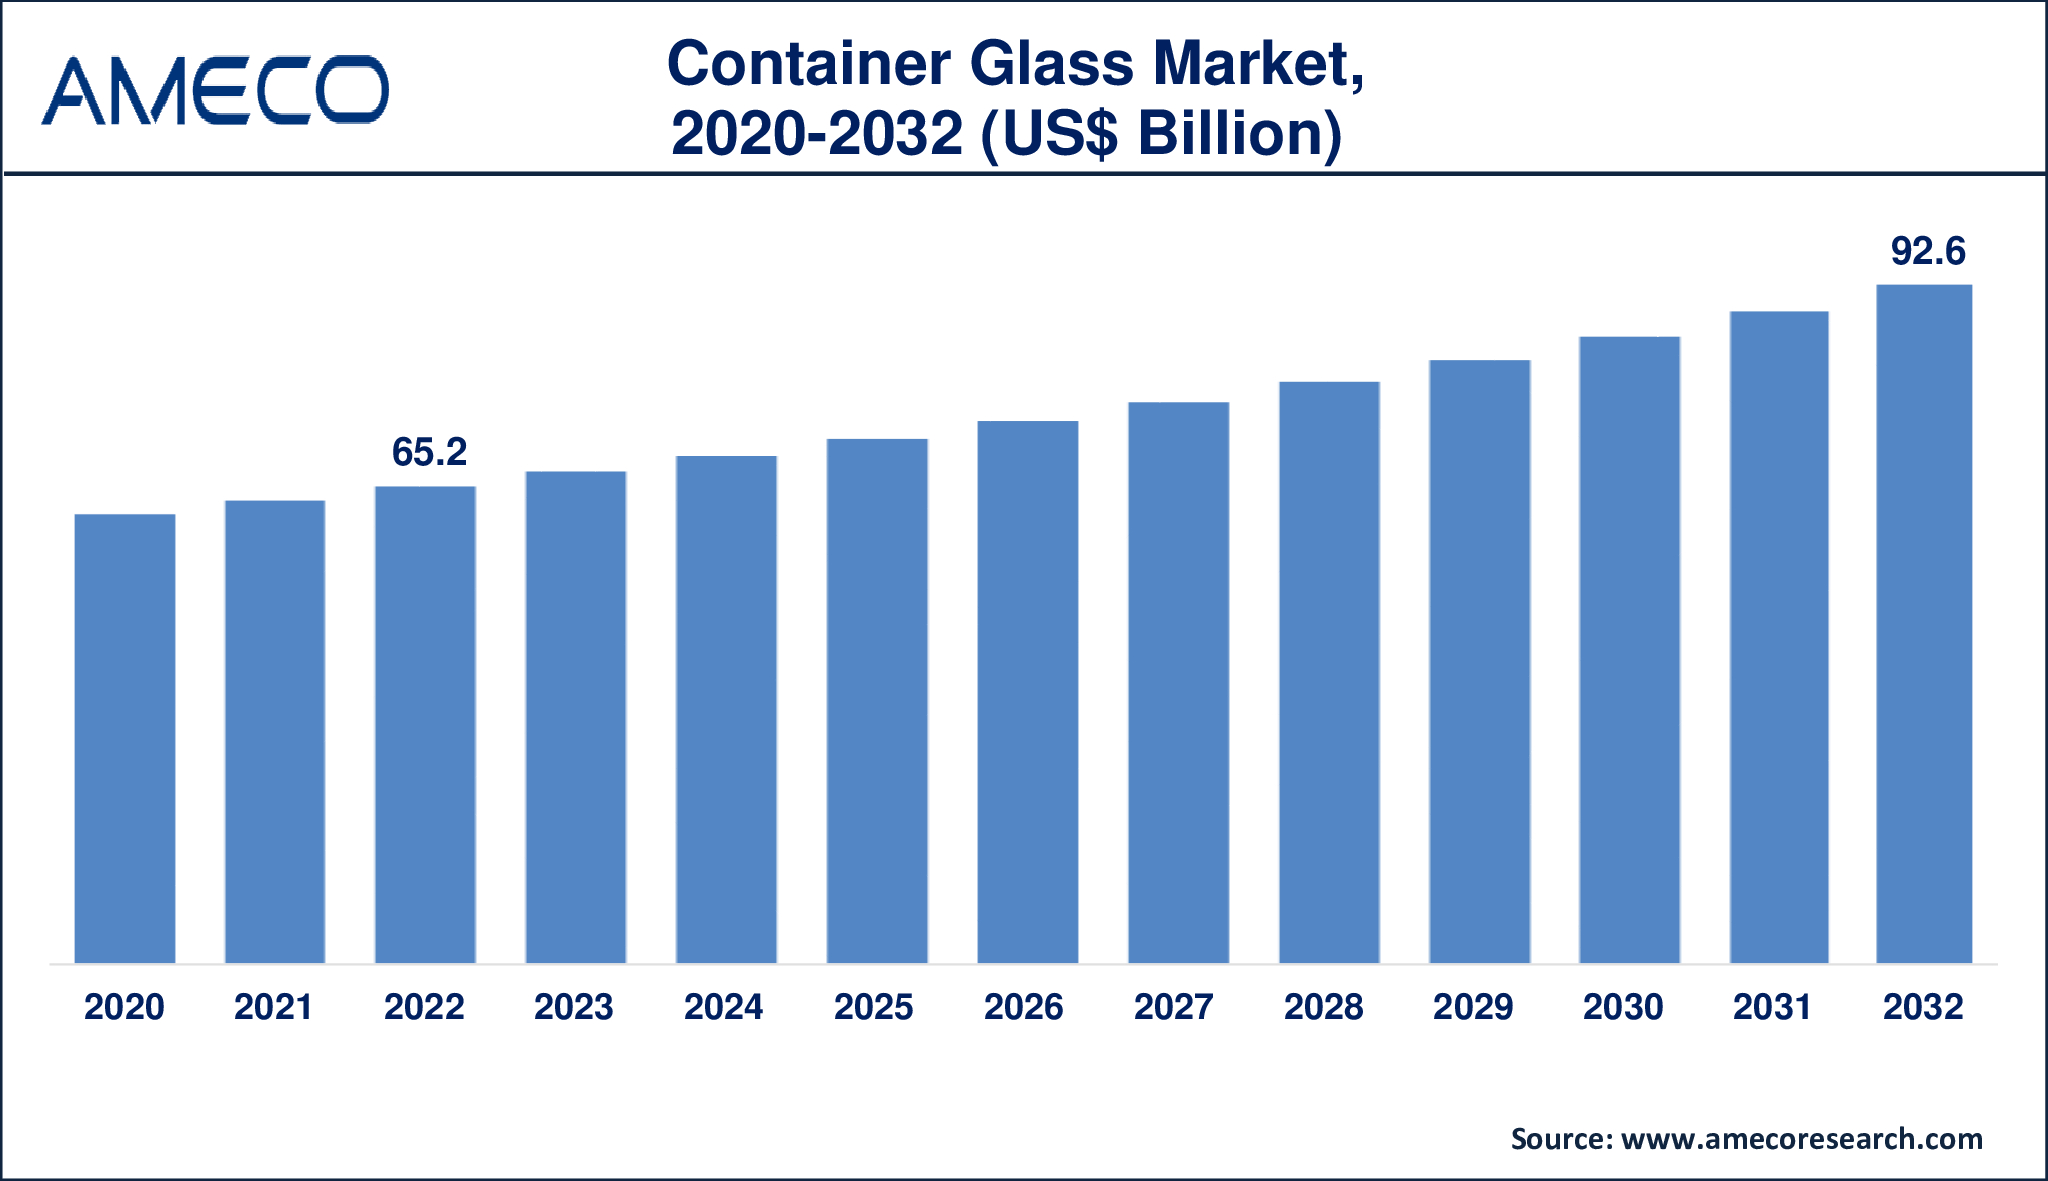 Container Glass Market Dynamics